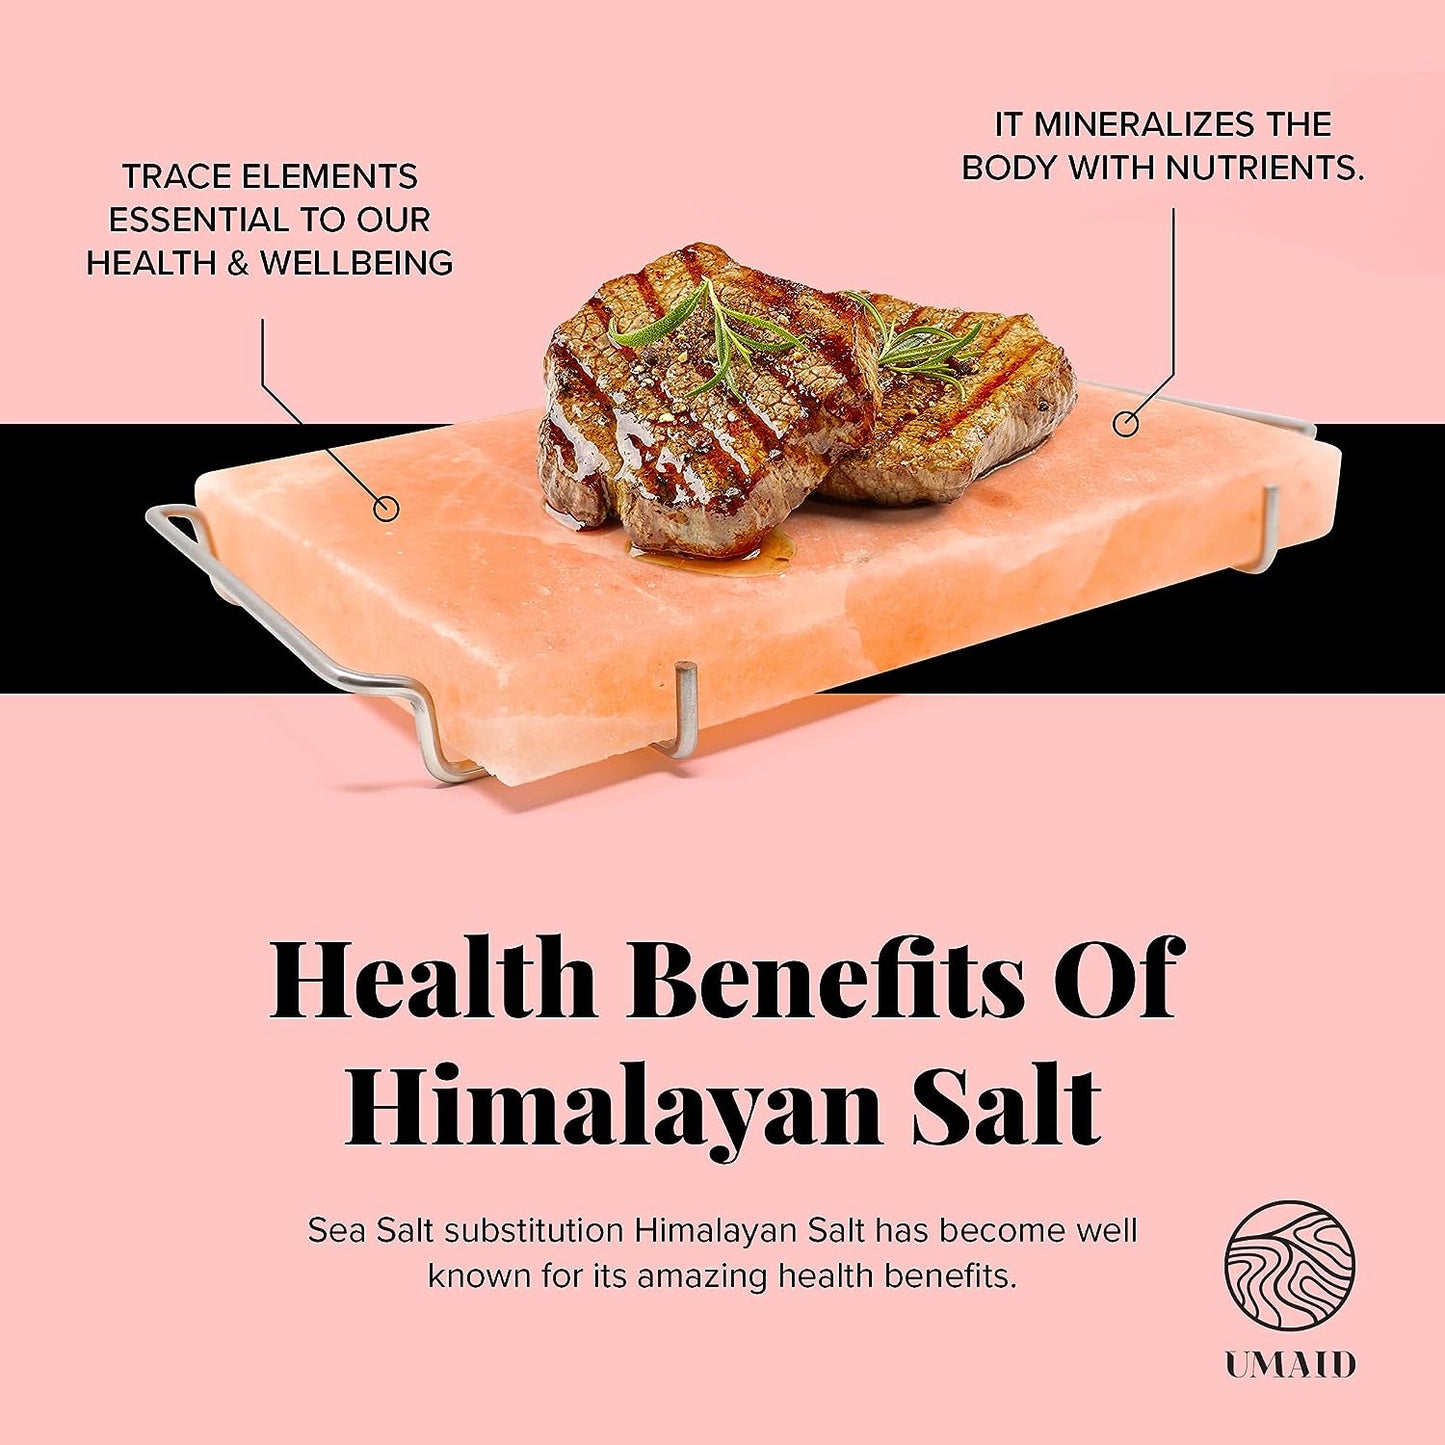 Himalayan Salt Block for Grilling, Cooking, Cutting and Serving,12X8X1.5 Food Grade Himalayan Pink Salt Stone on Stainless Steel Plate & Recipe Booklet, Unique Gifts for Men, Women, Chef, Cooks